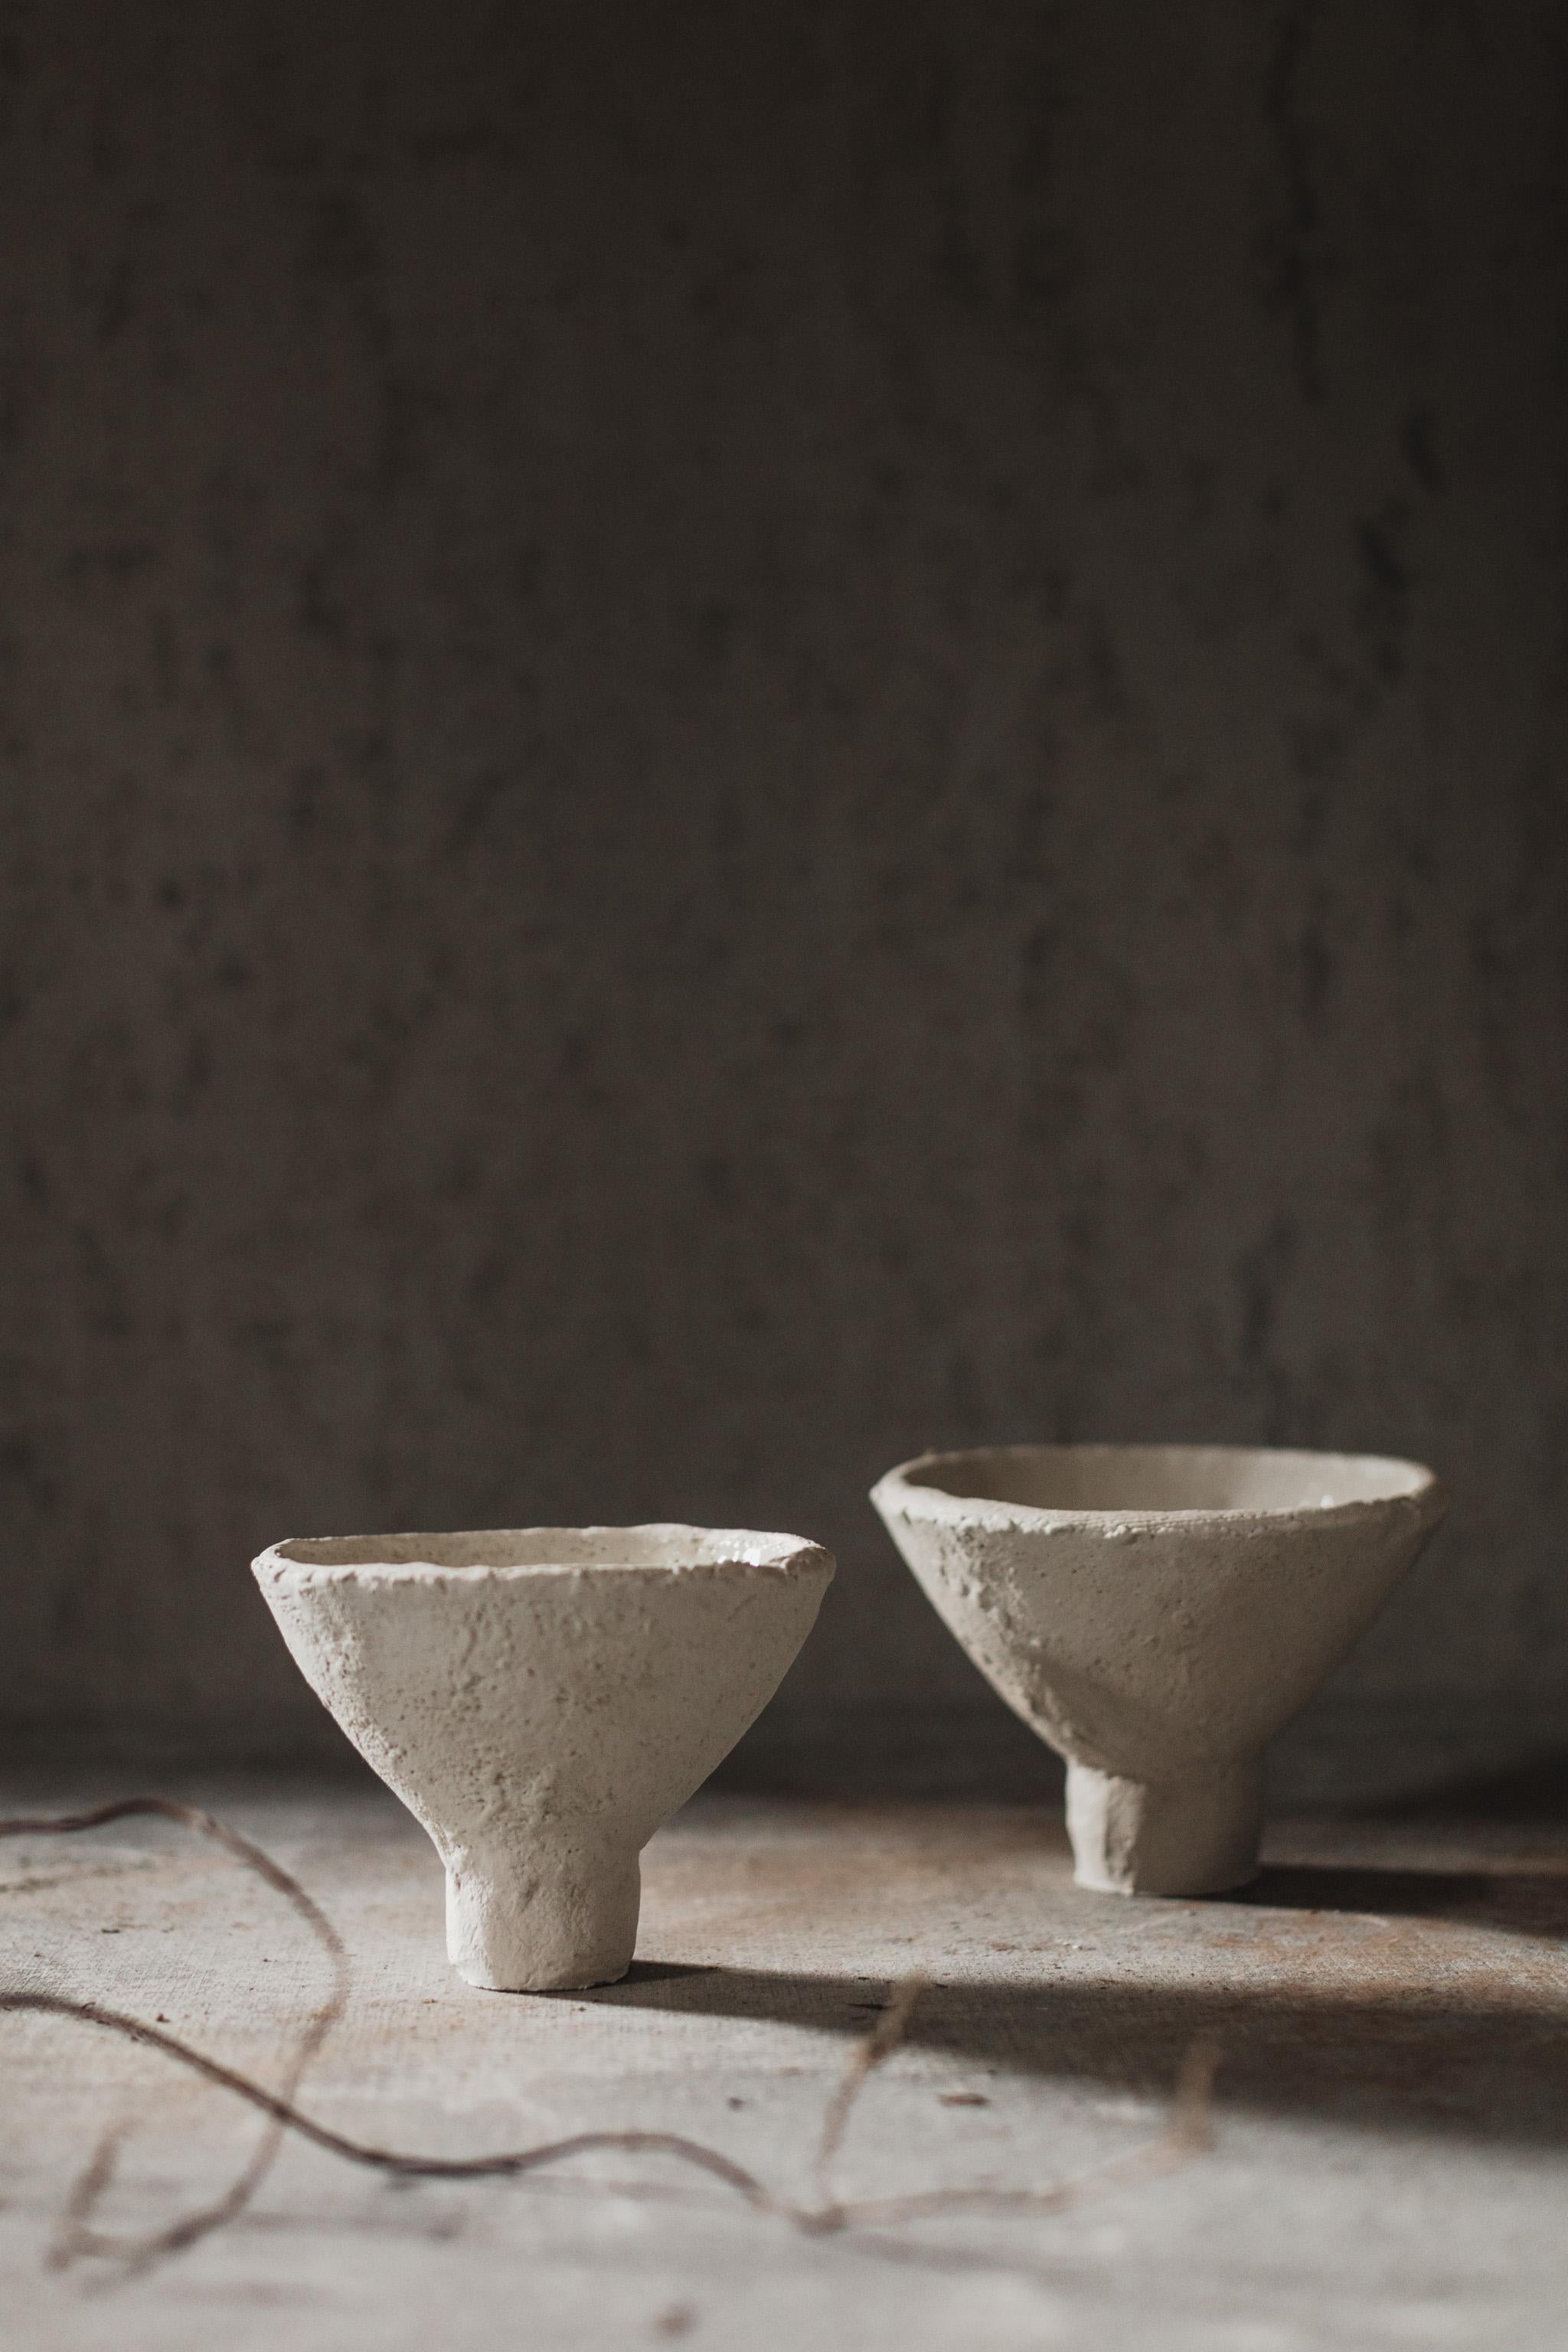 Mugly NYC is a Brooklyn based ceramic studio specializing in richly textured sculptural clay and porcelain that evoke the poetics of the handmade.

These Compote Vessels were handmade in 2022 with highly textured white sculpture clay and porcelain